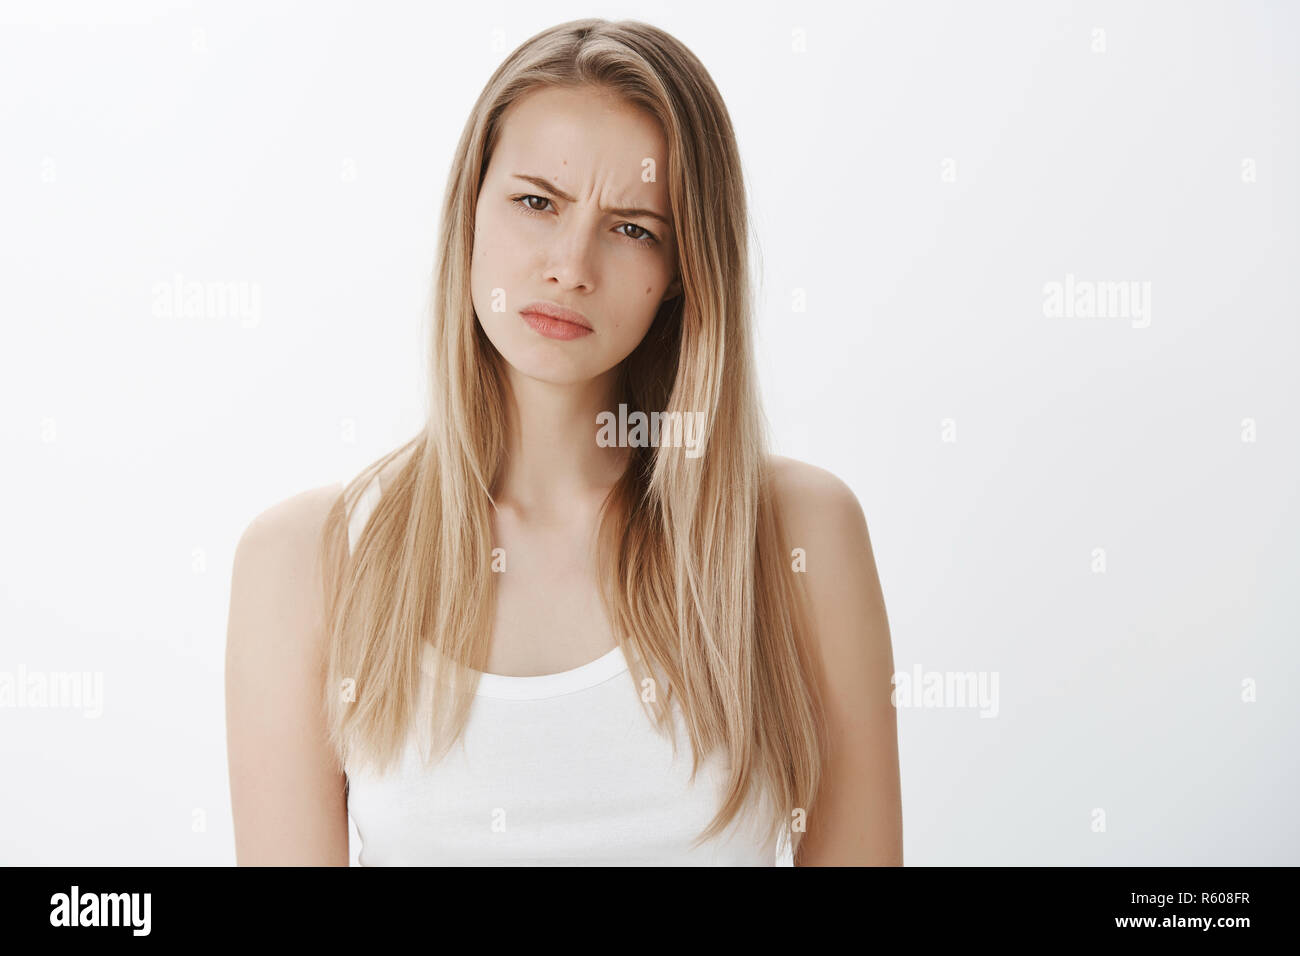 Girl suspects something wrong being doubtful in friend telling whole truth, squinting suspicious at camera as frowning and making hesitant face, stand Stock Photo